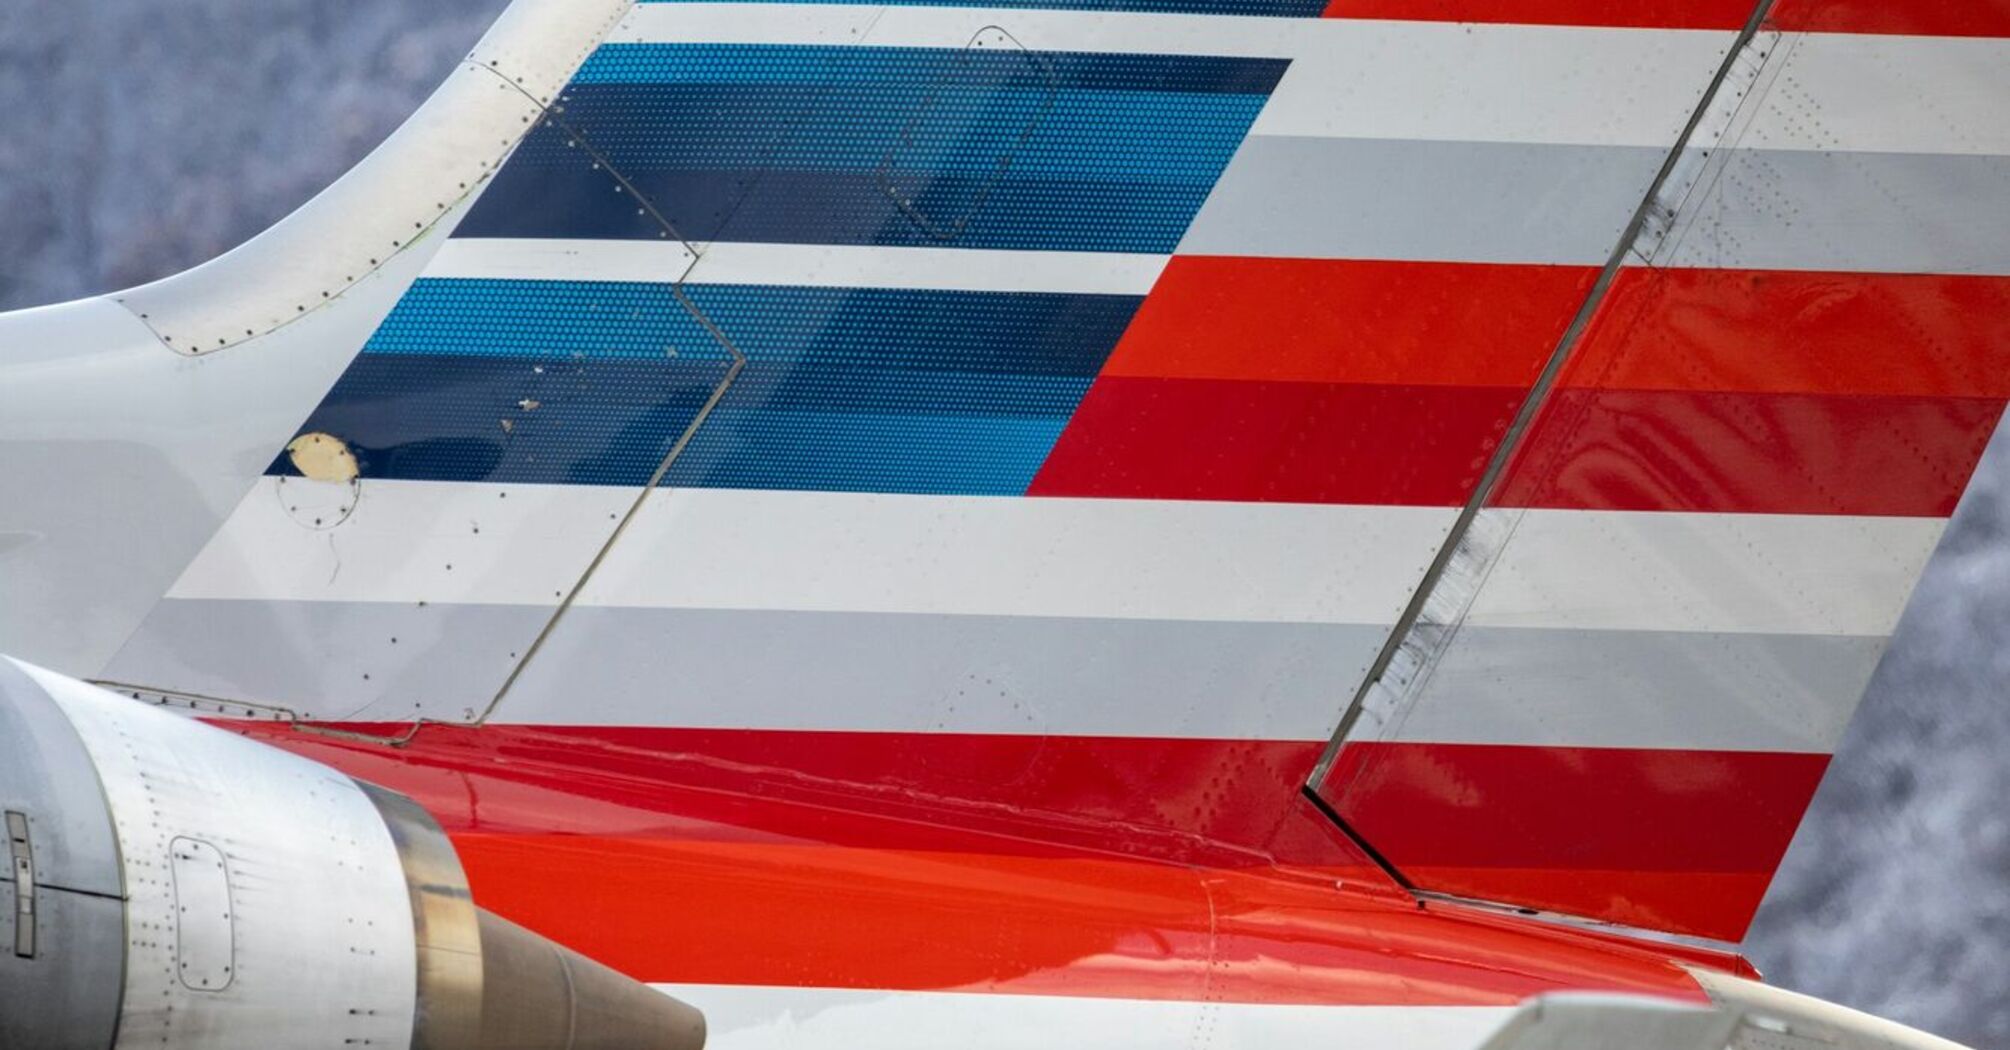 Close-up of an American Airlines aircraft tail with the snowy mountains in the background